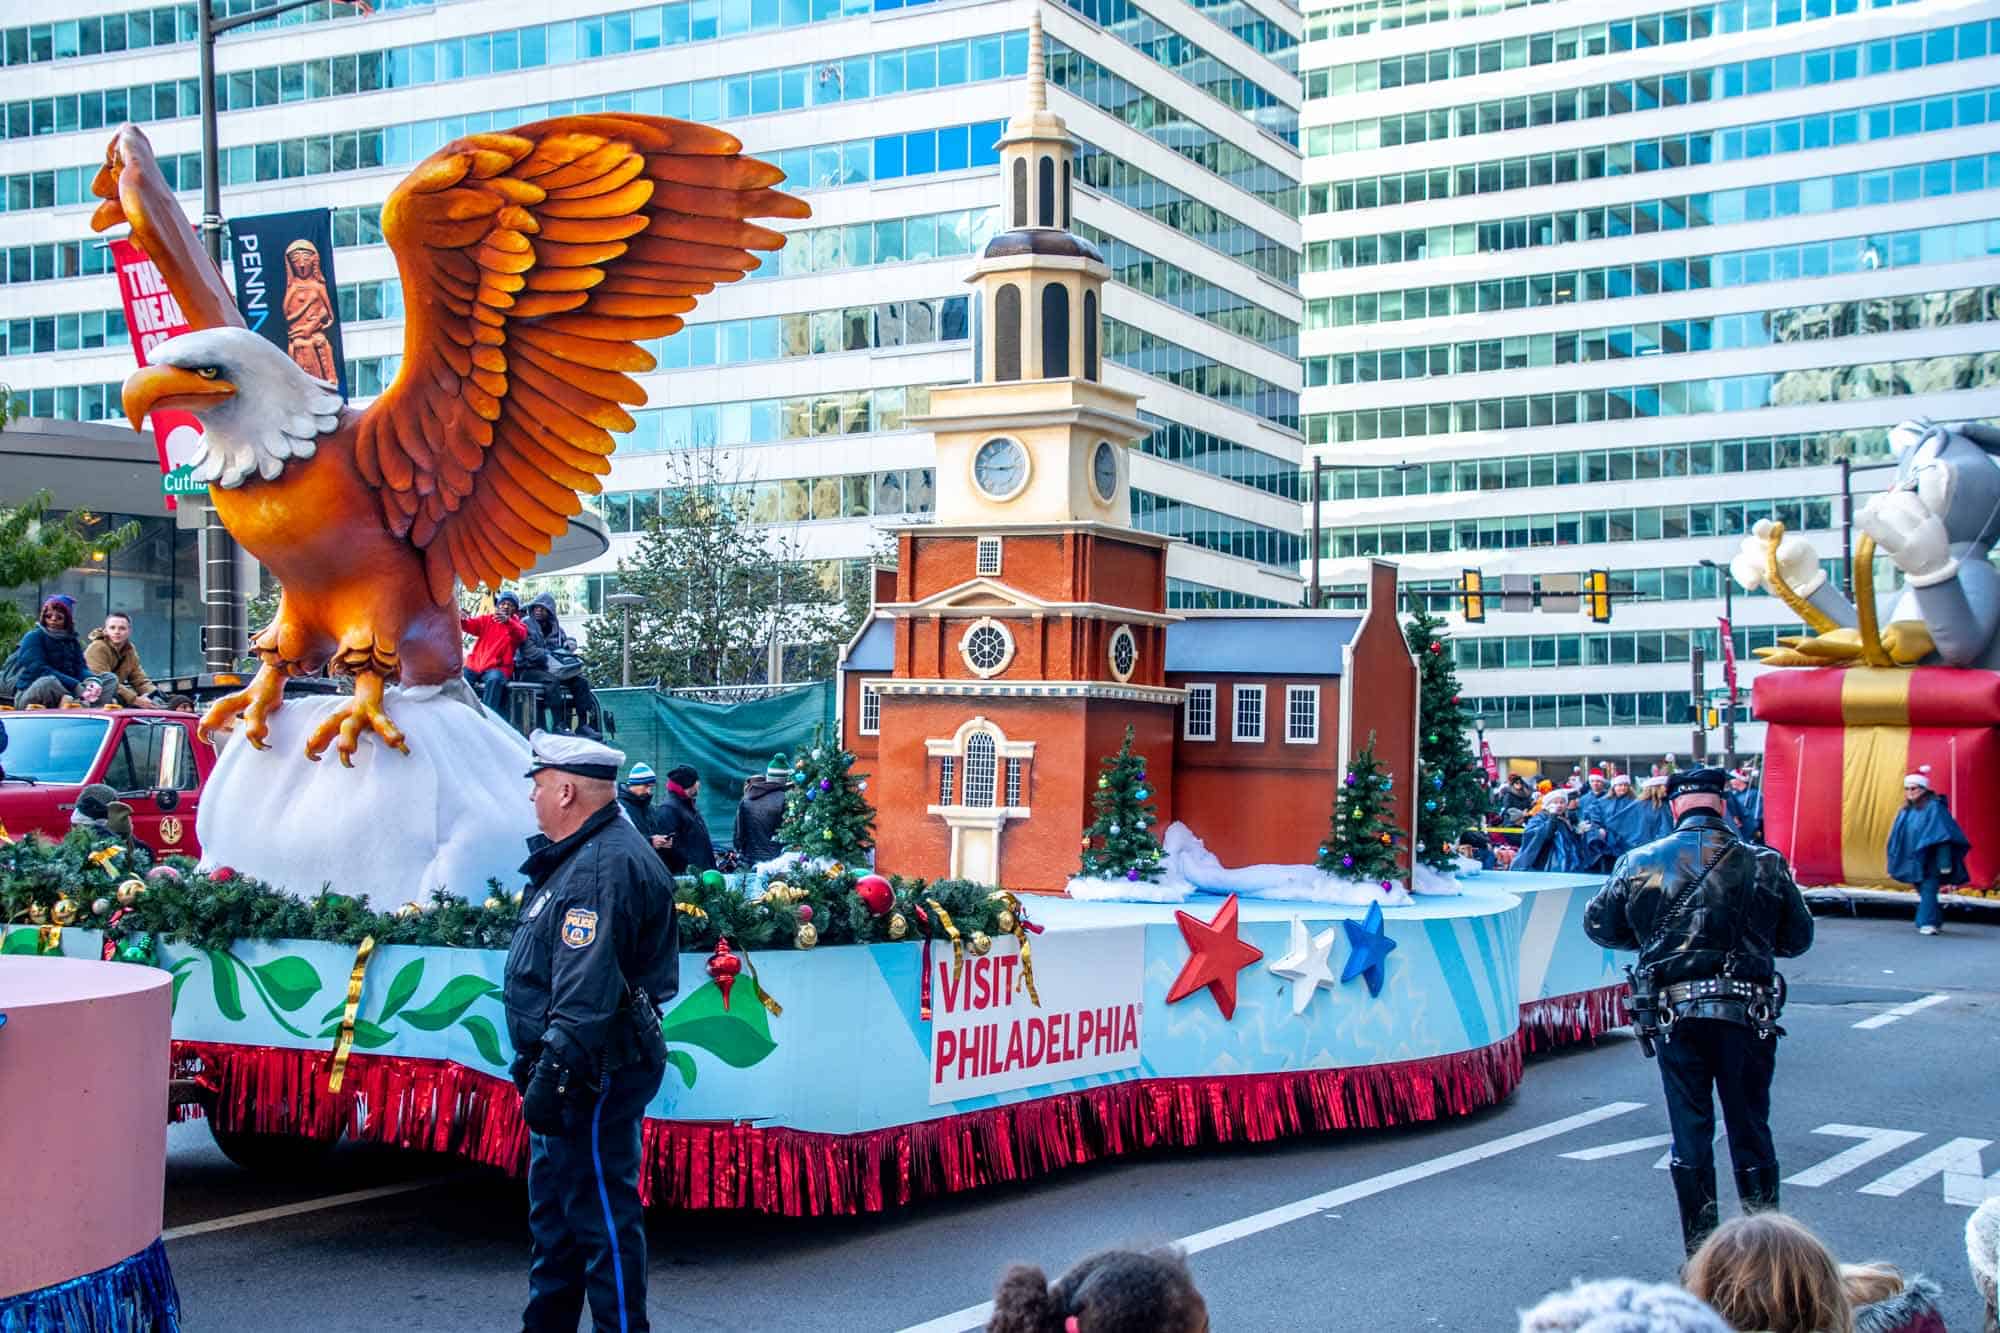 Float in parade with Philly Eagle and Independence Hall on it